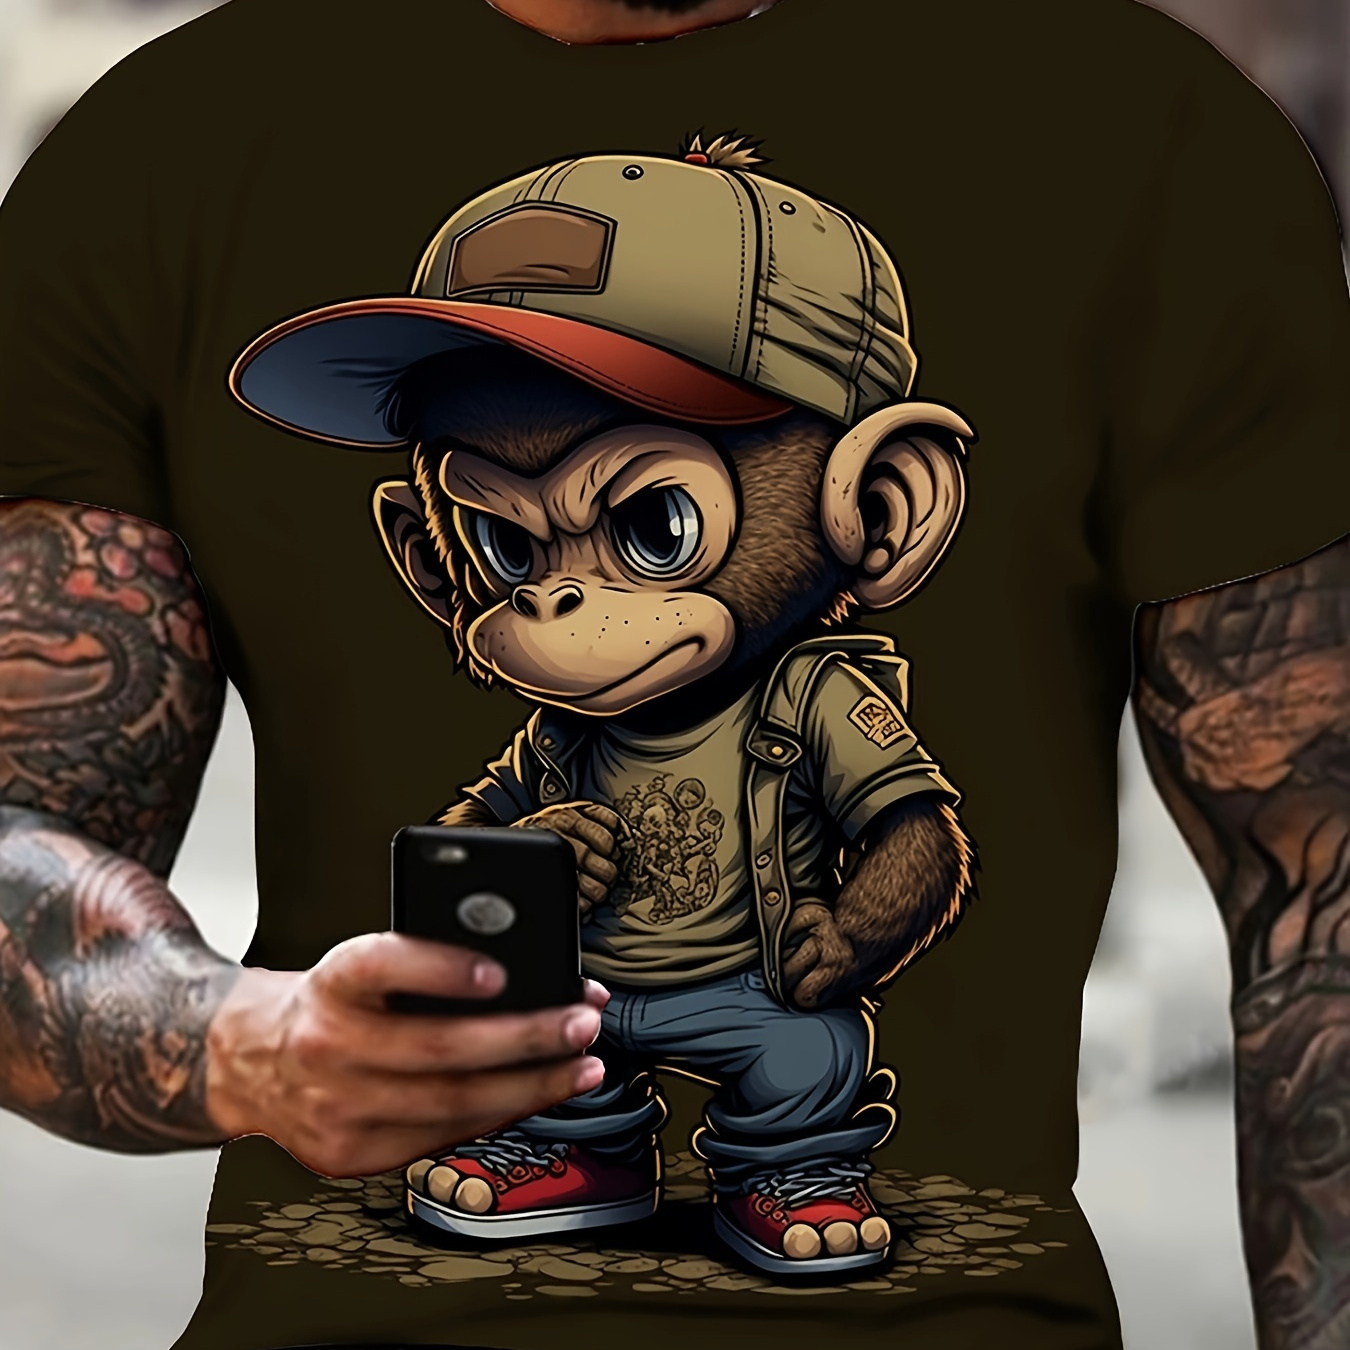 

Plus Size Men's Cool Cartoon Monkey Graphic Print T-shirt For Summer, Outdoor Sports Short Sleeve Tees For Males